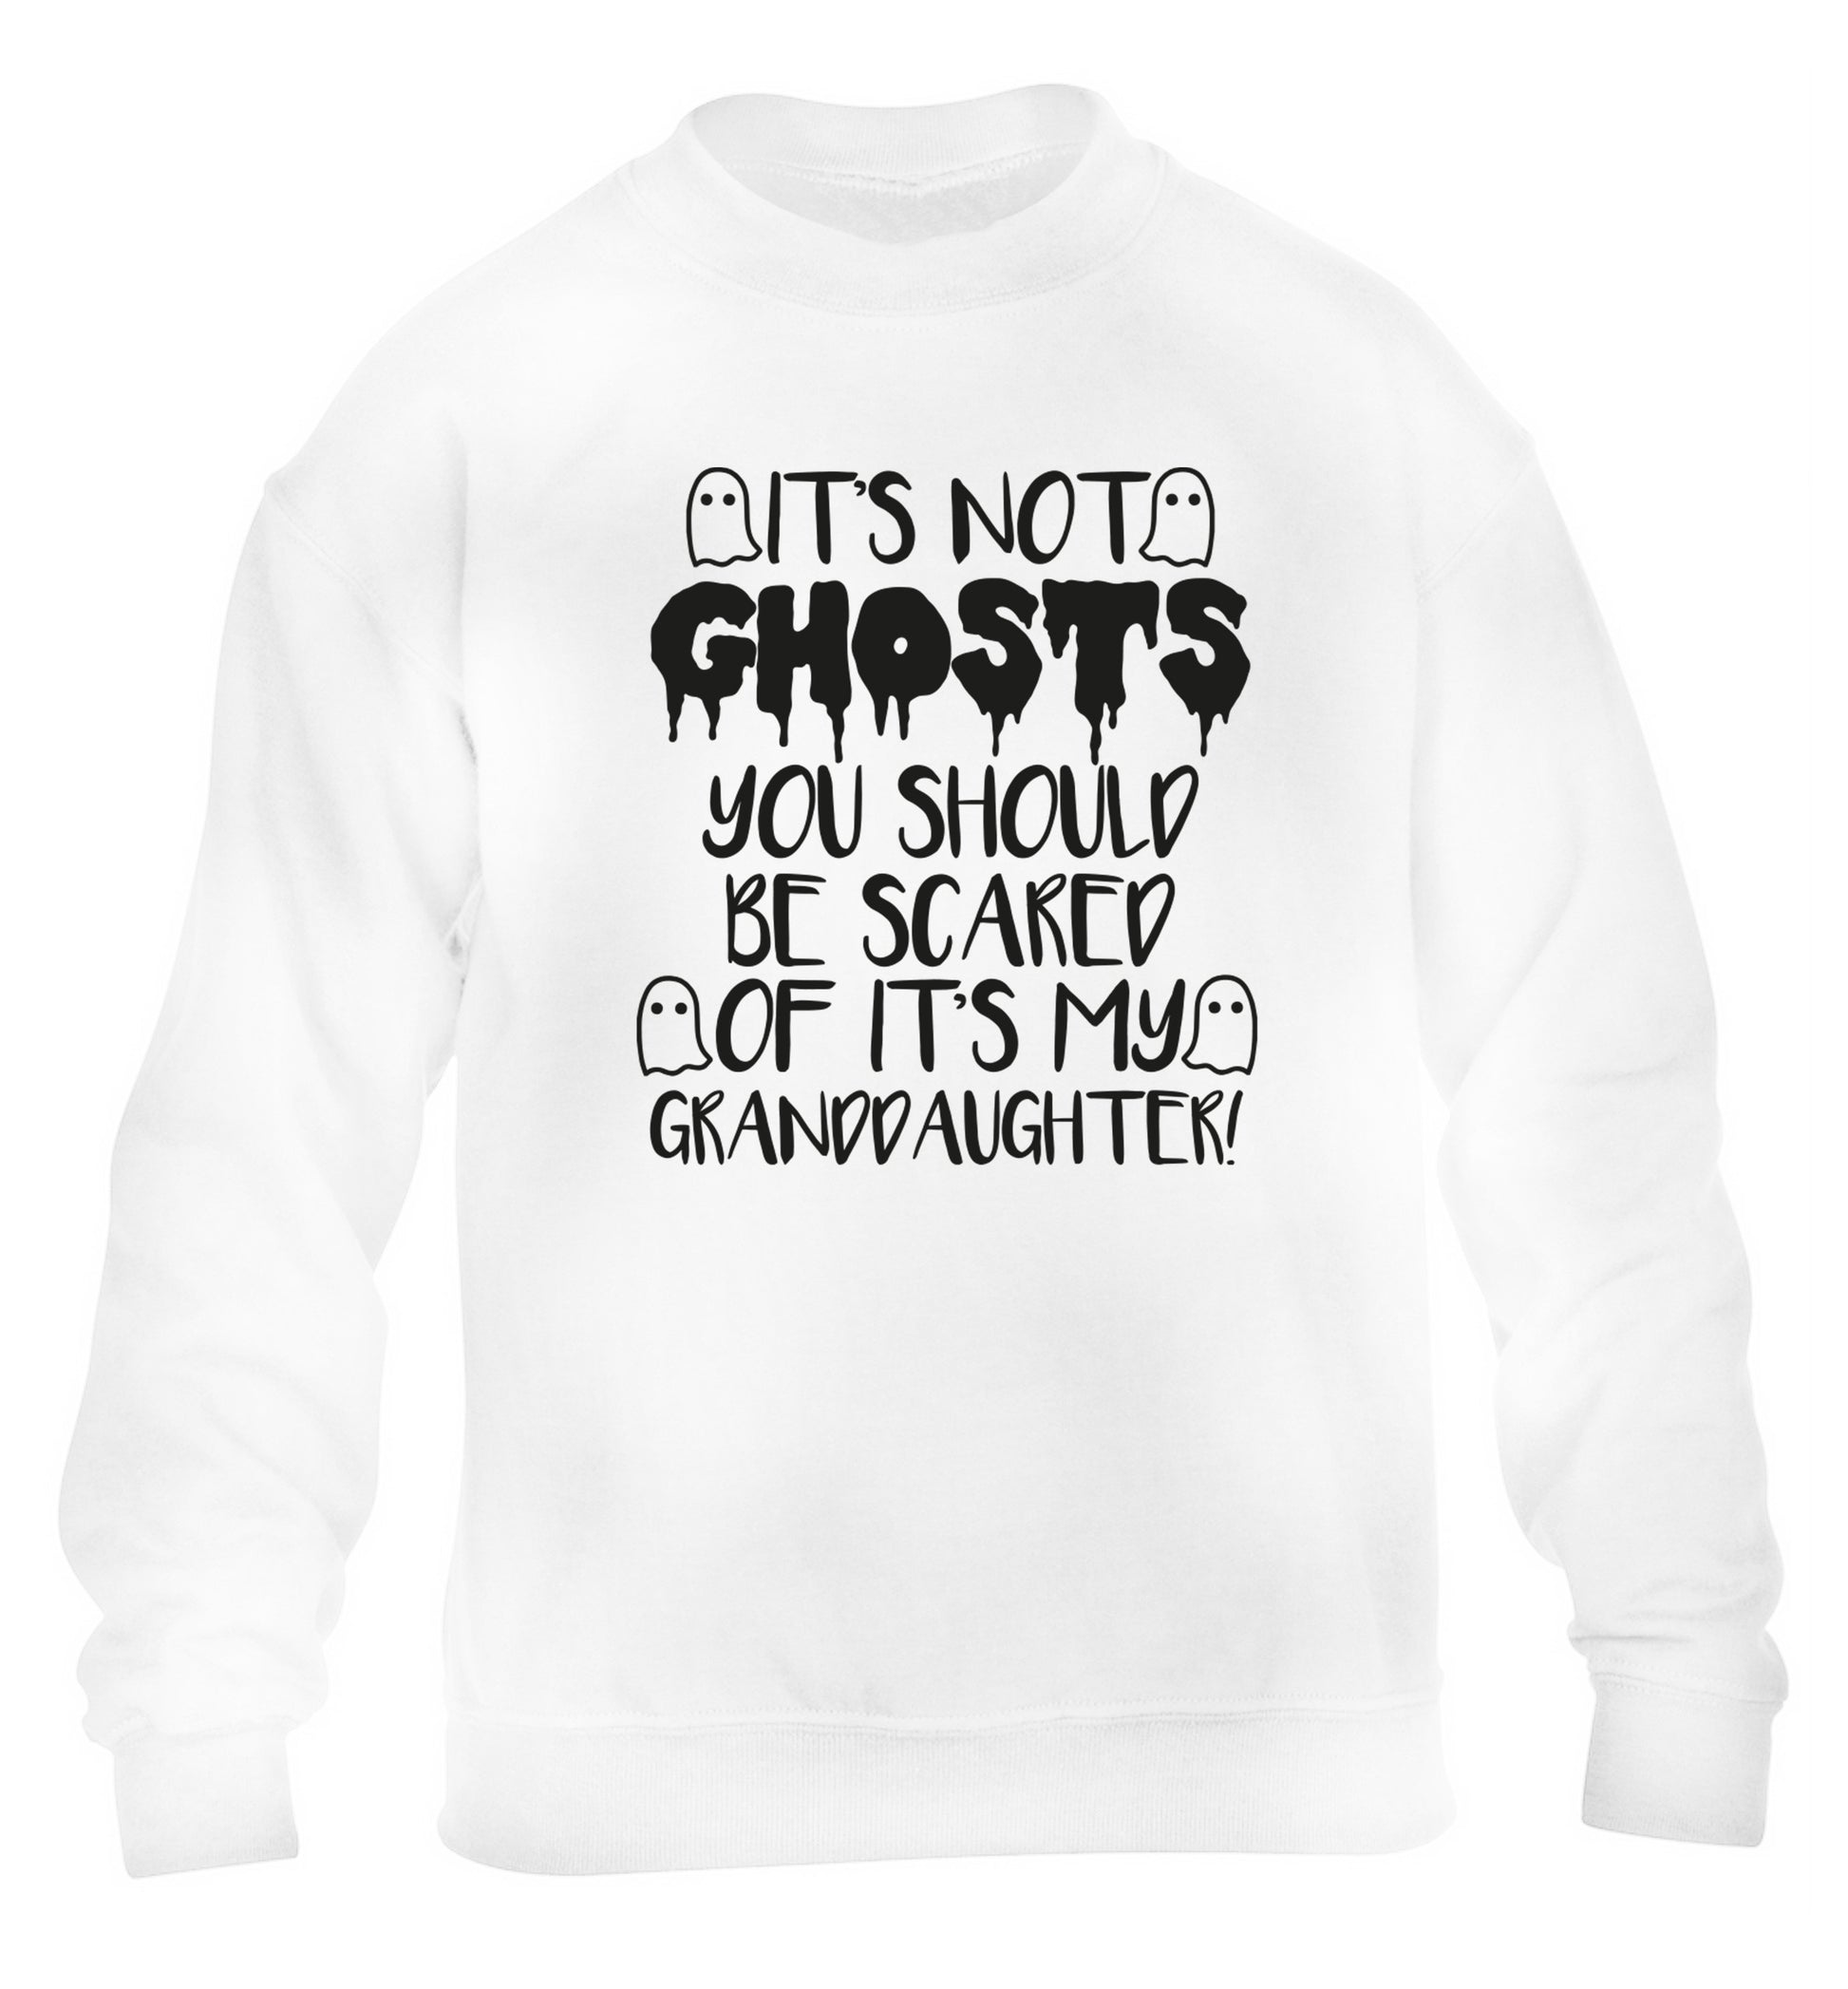 It's not ghosts you should be scared of it's my granddaughter! children's white sweater 12-14 Years